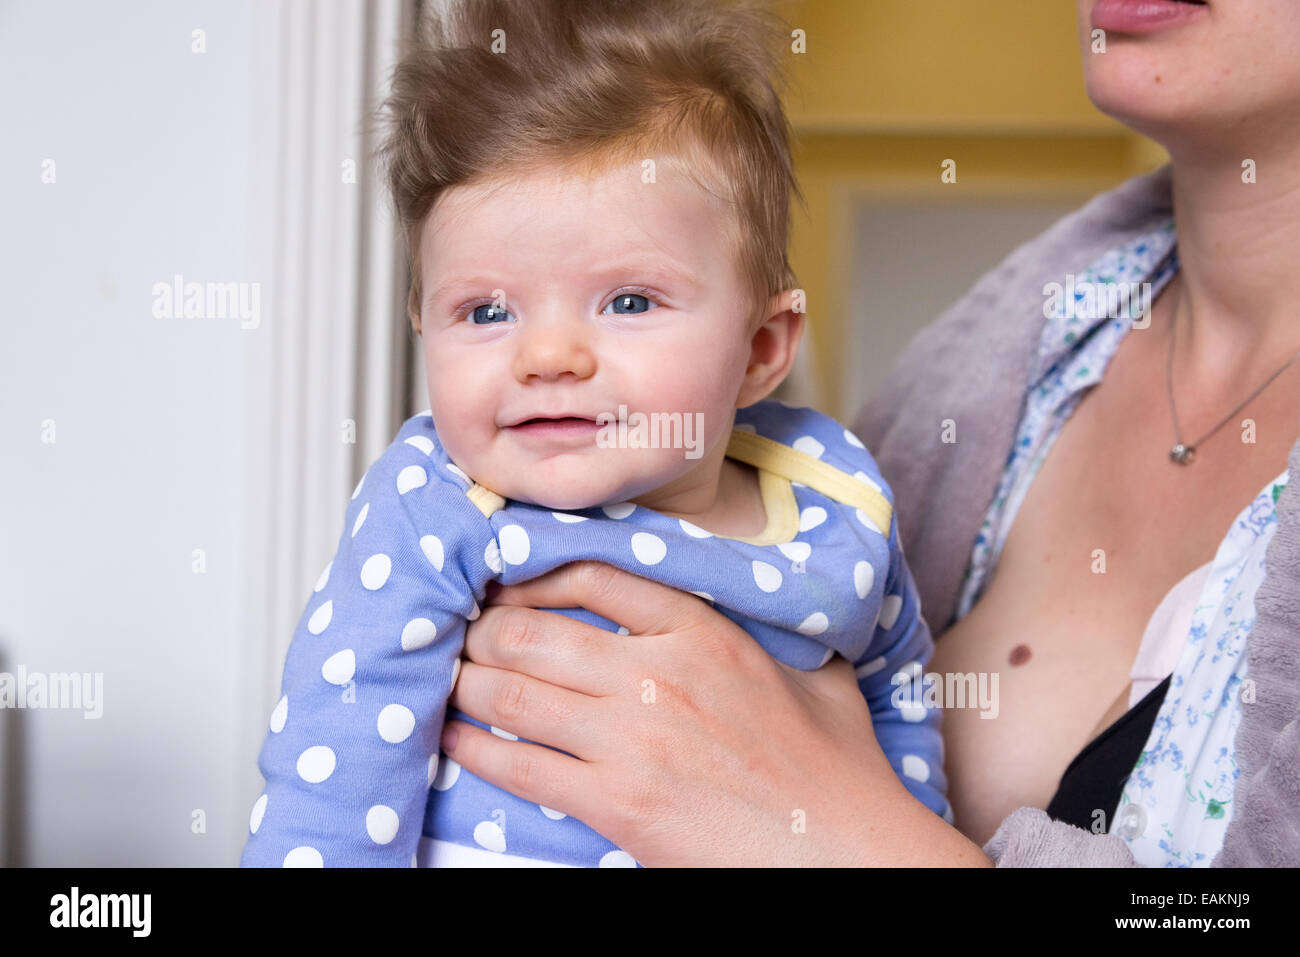 Mother holding three month old baby girl with lots of hair Stock Photo